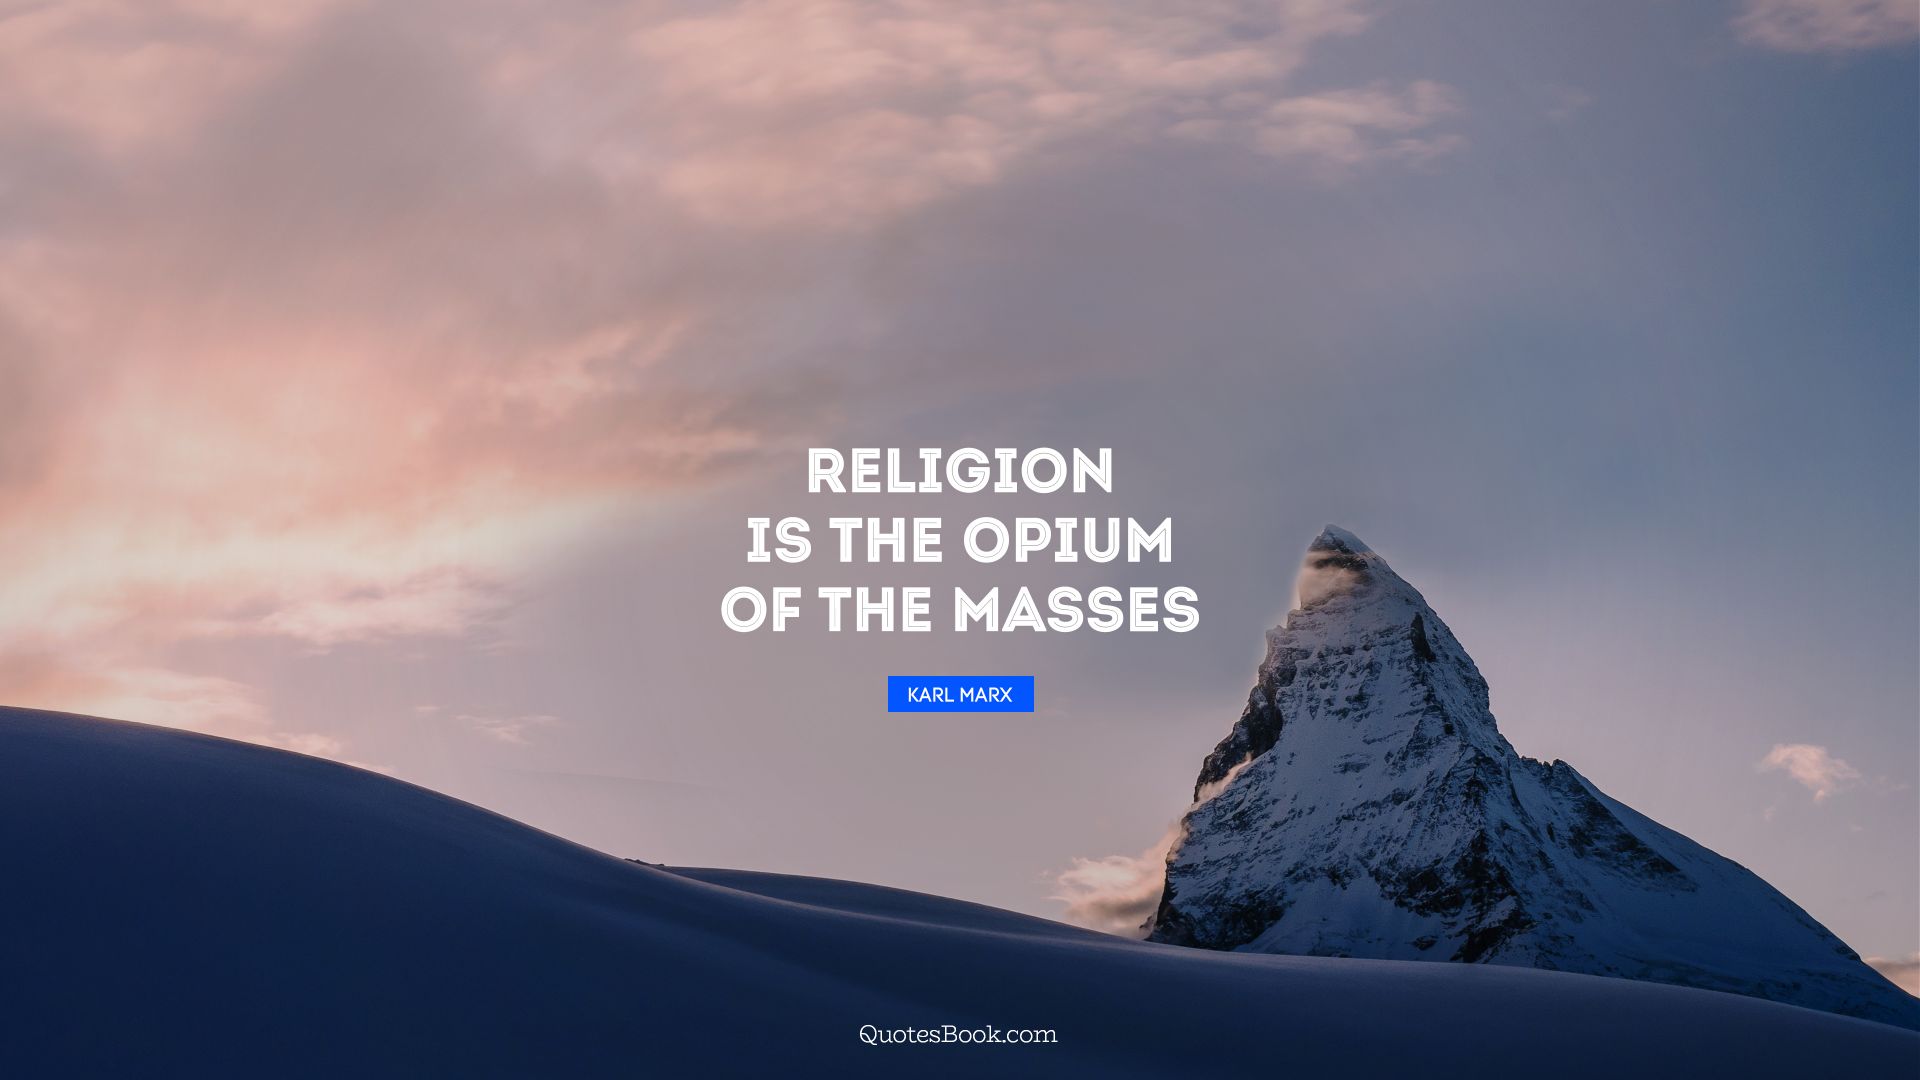 Religion is the opium of the masses. - Quote by Karl Marx